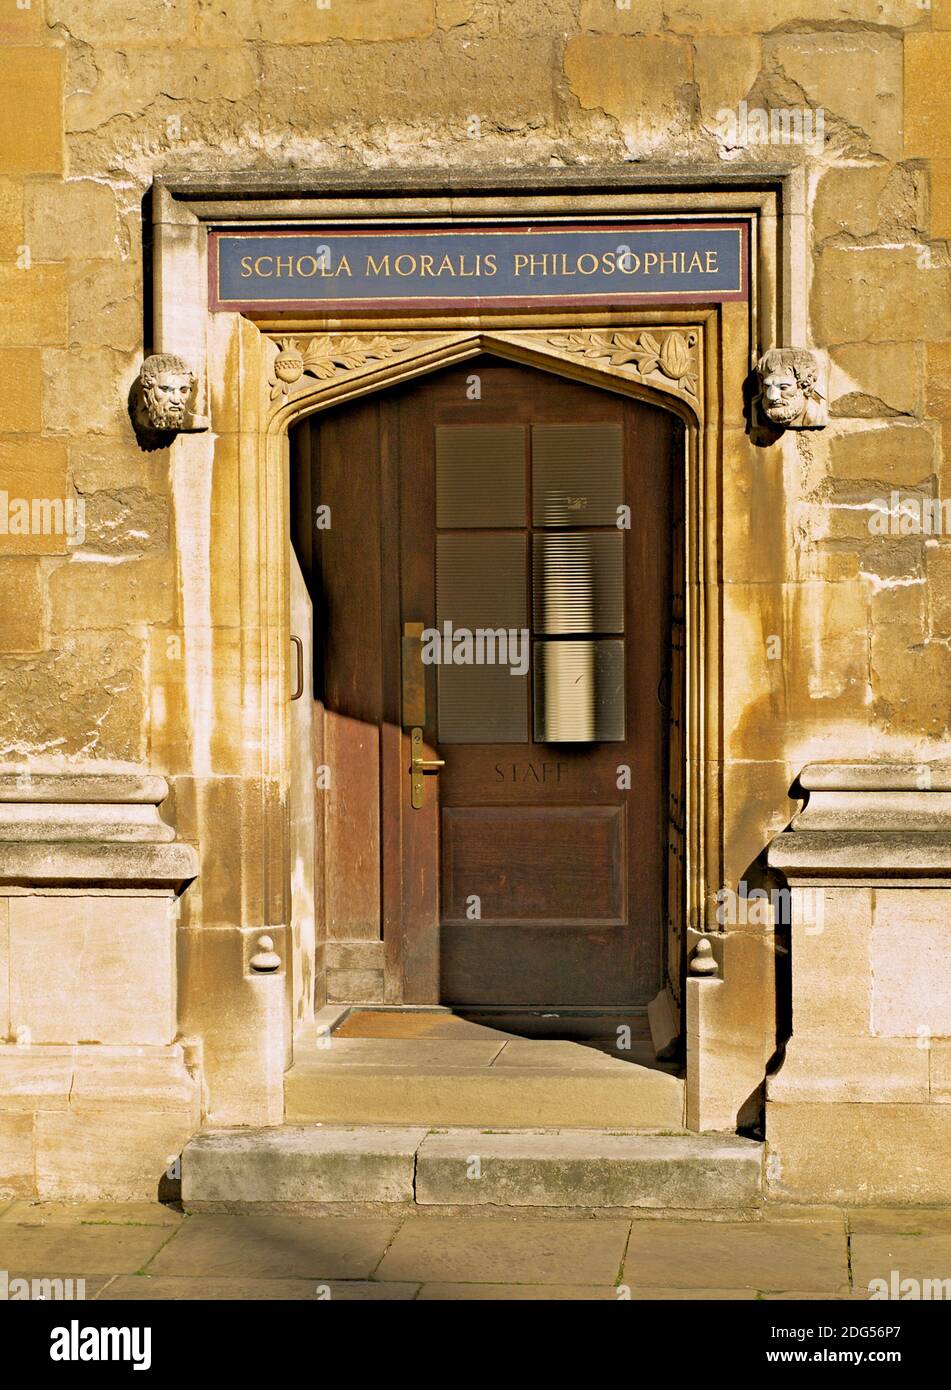 Oxford - The Bodleian Library Stock Photo